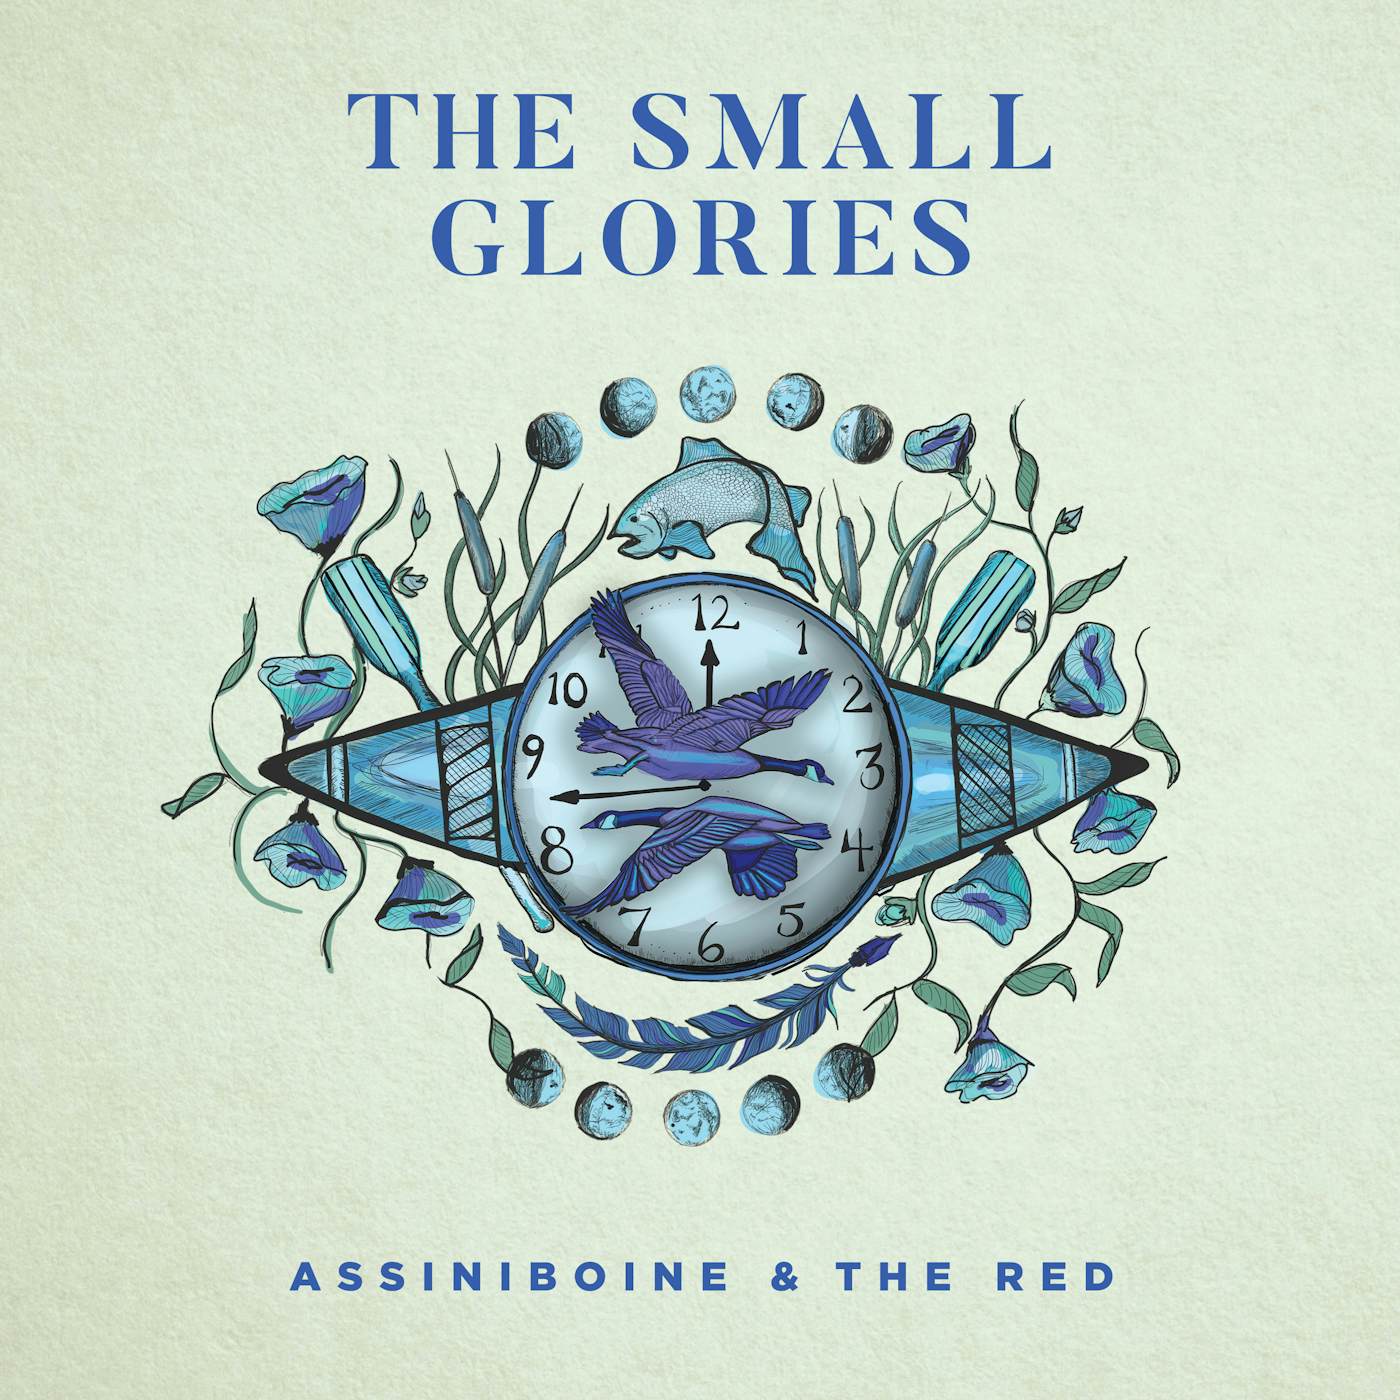 The Small Glories ASSINIBOINE & THE RED CD